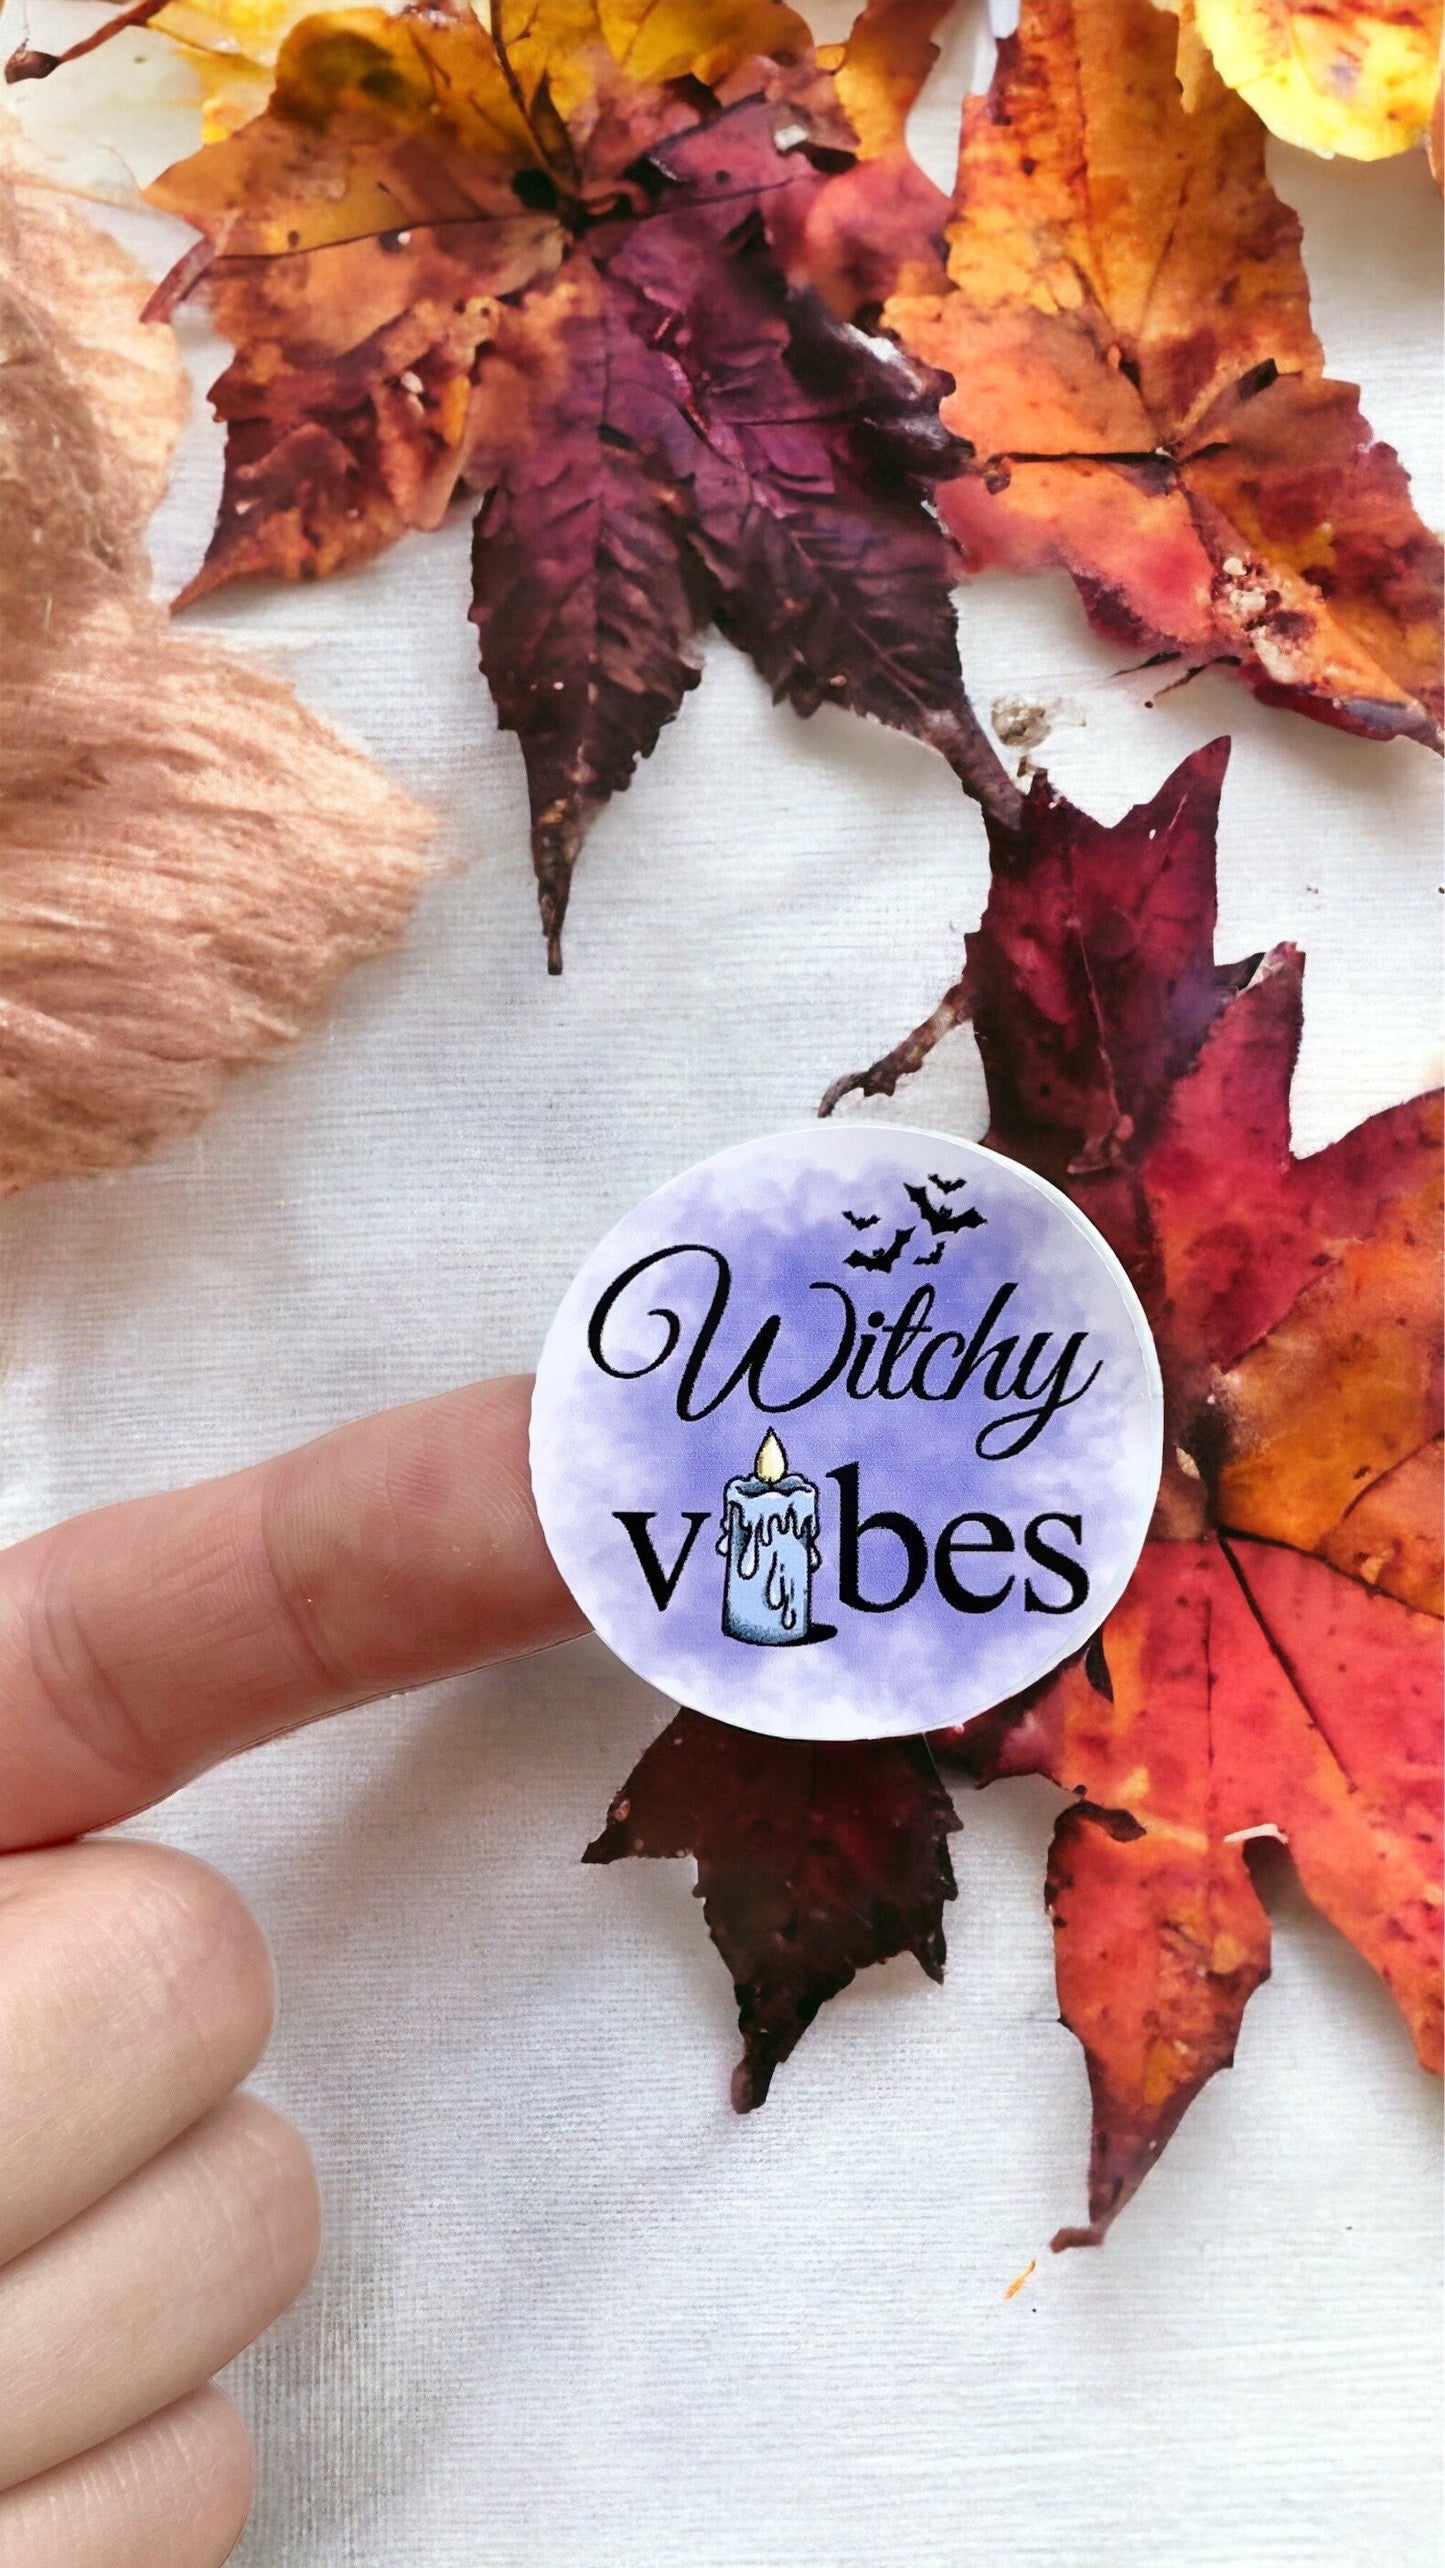 Witchy Vibes Sticker | 38mm Stickers | Witch Sticker | Magic Label | Notebook Planner Diary